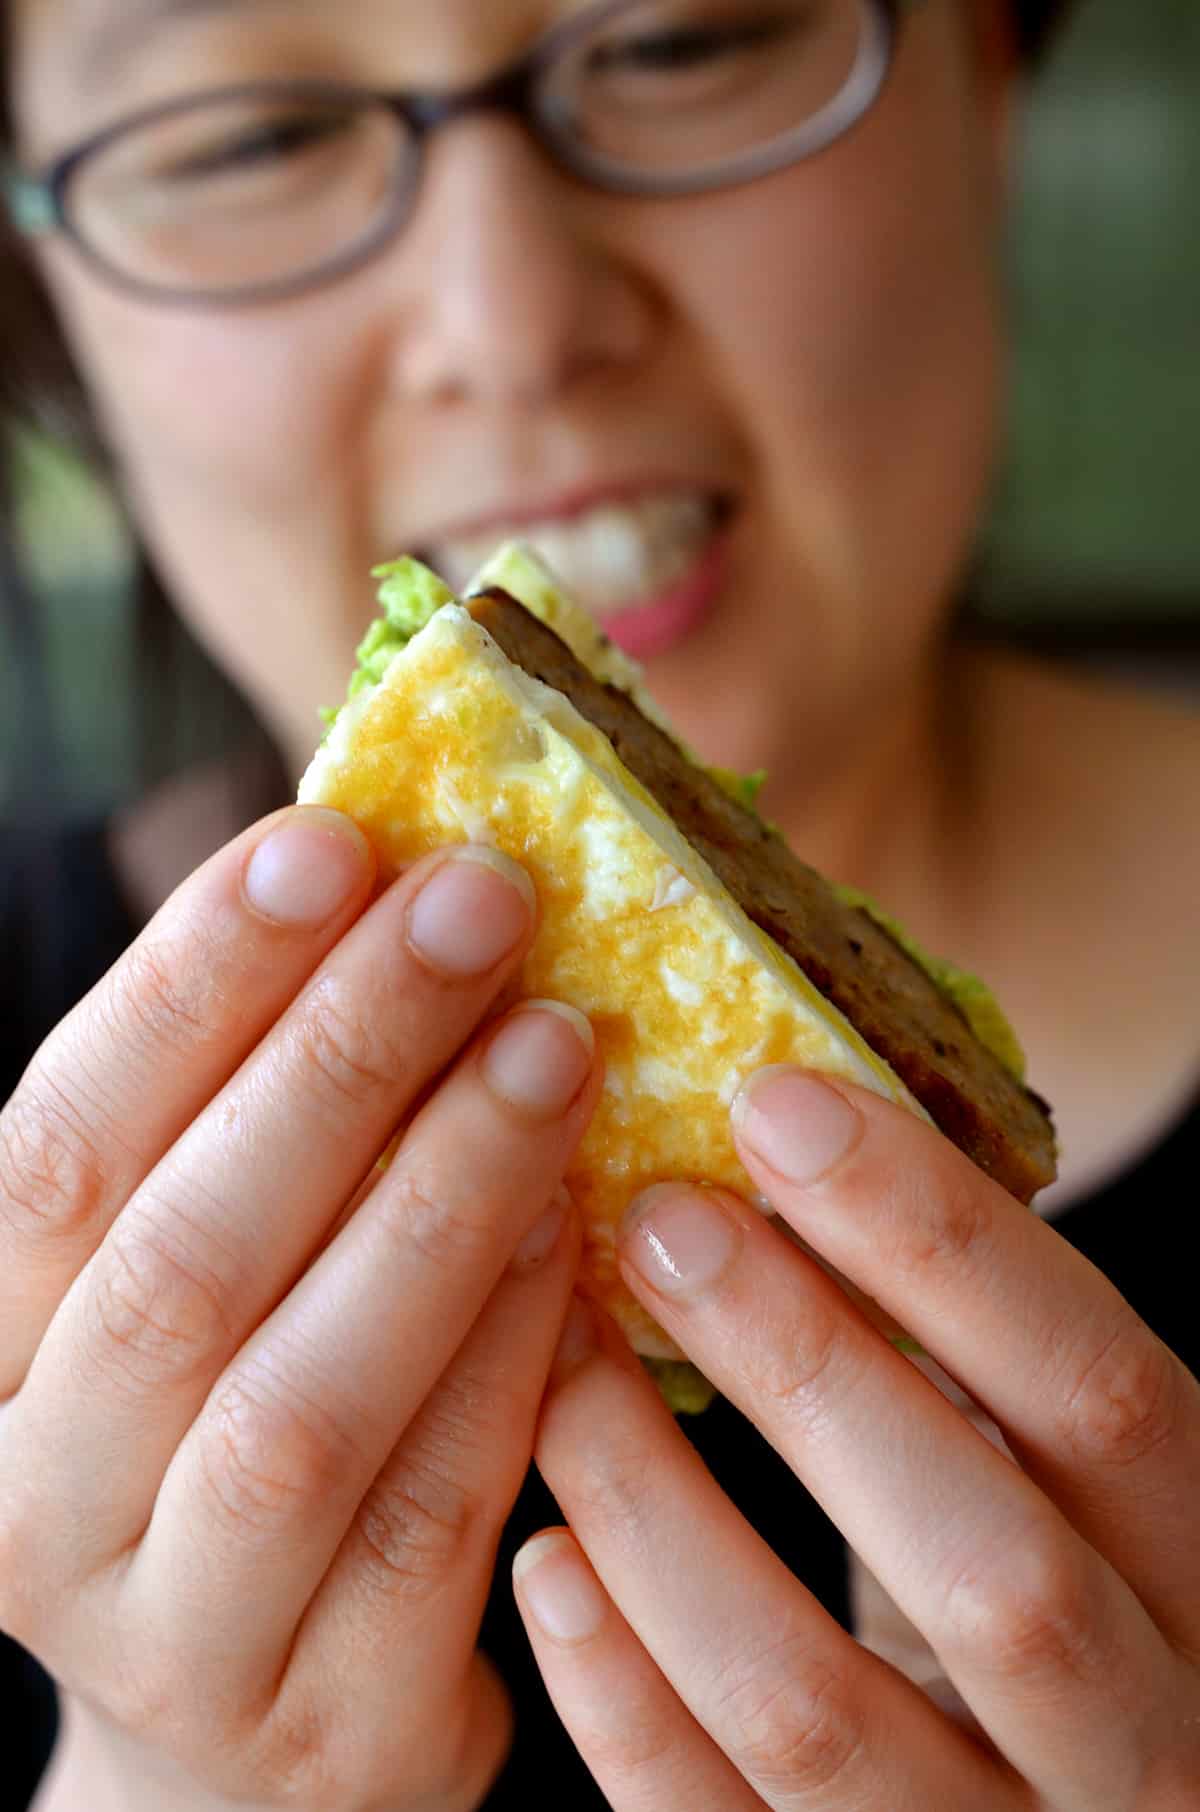 A smiling Asian woman is holding a paleo egg McMuffin.